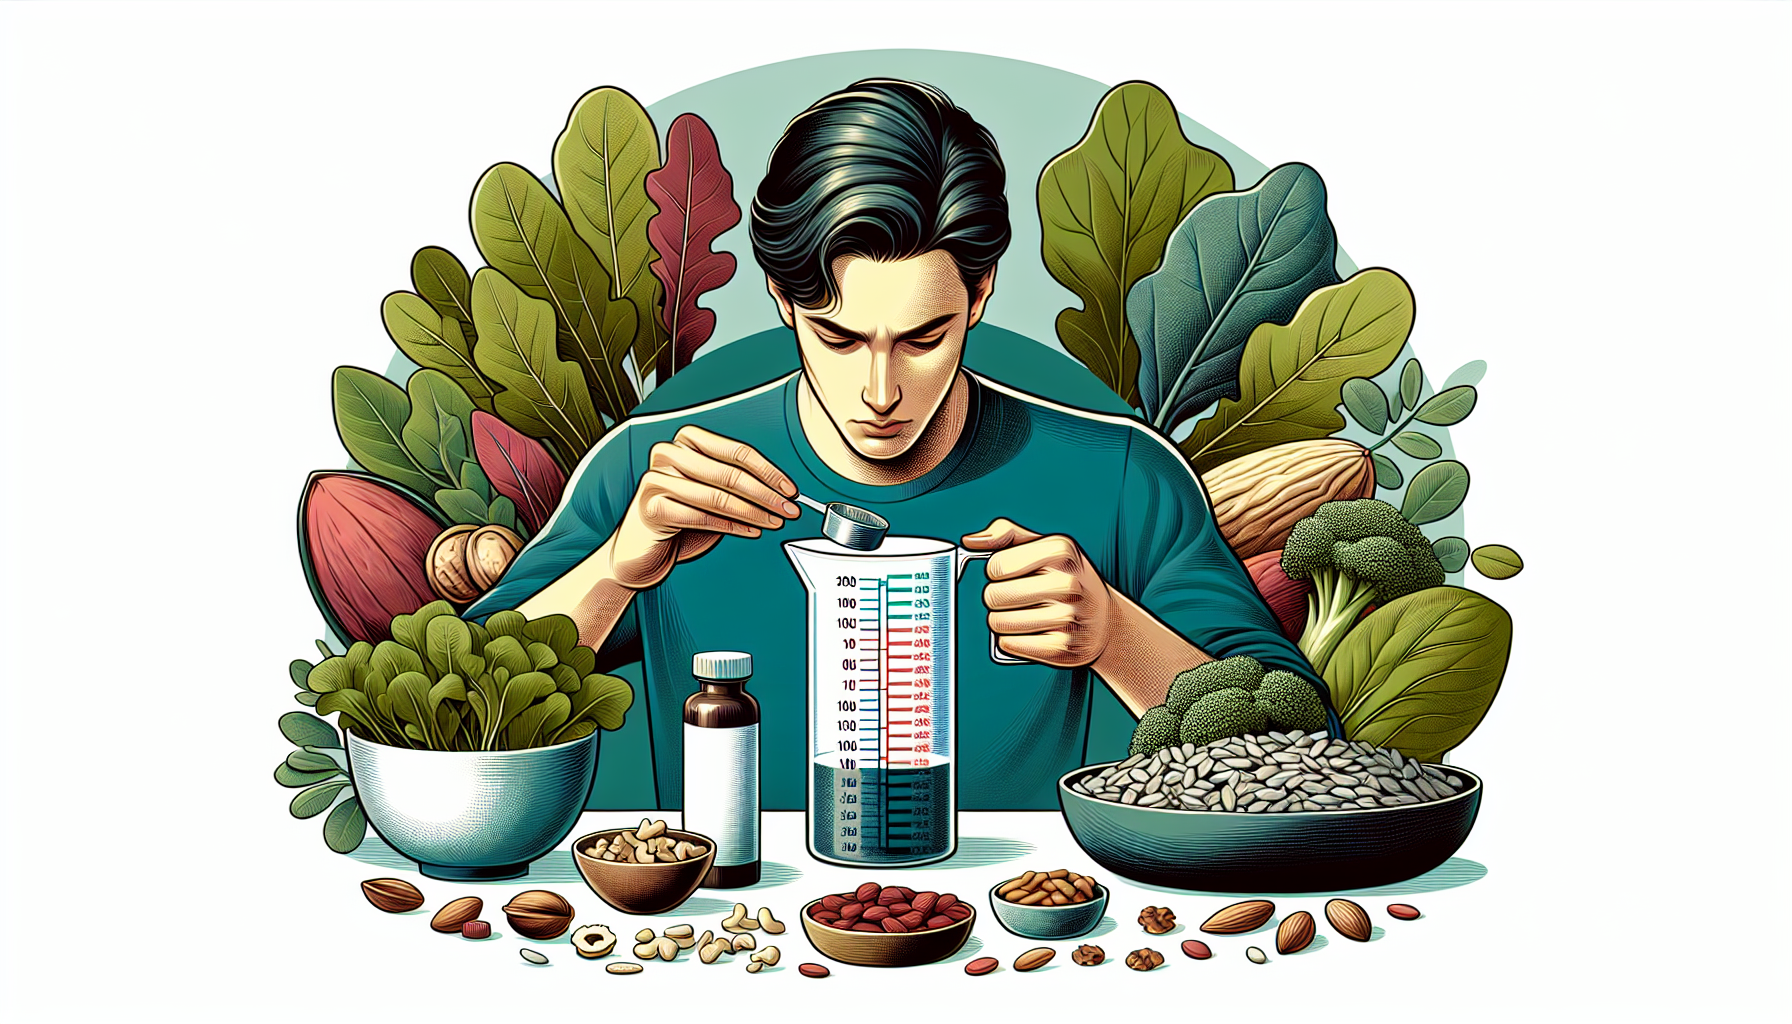 Illustration of a person measuring daily magnesium intake